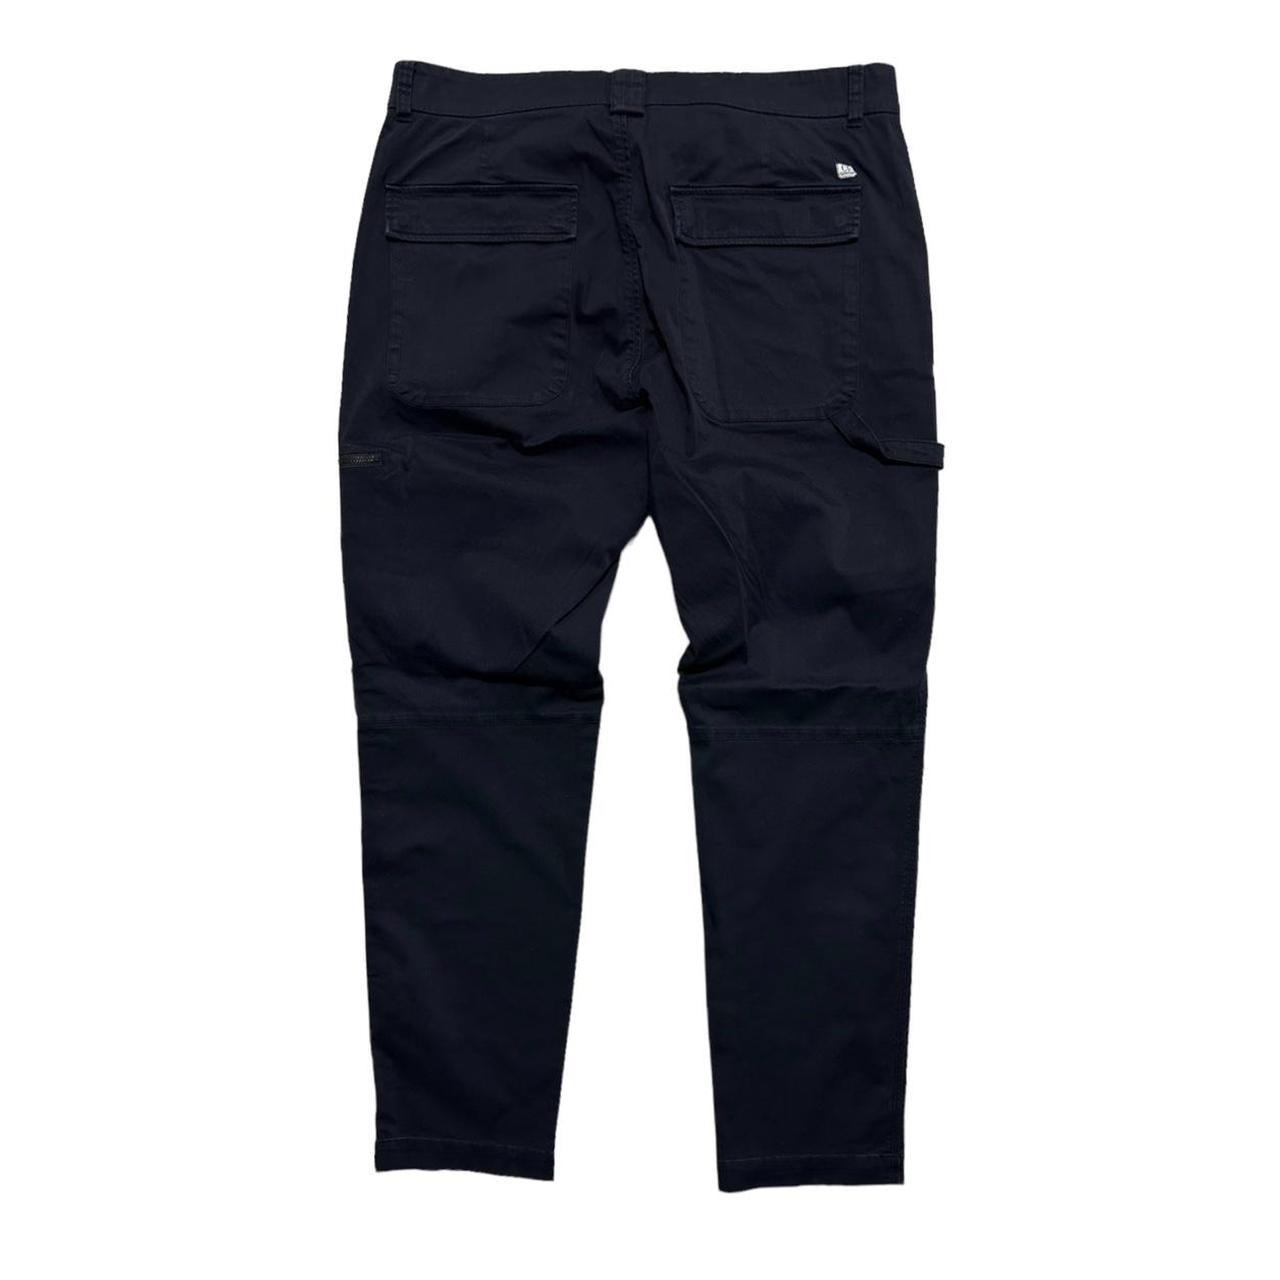 CP Company Cargos - Known Source